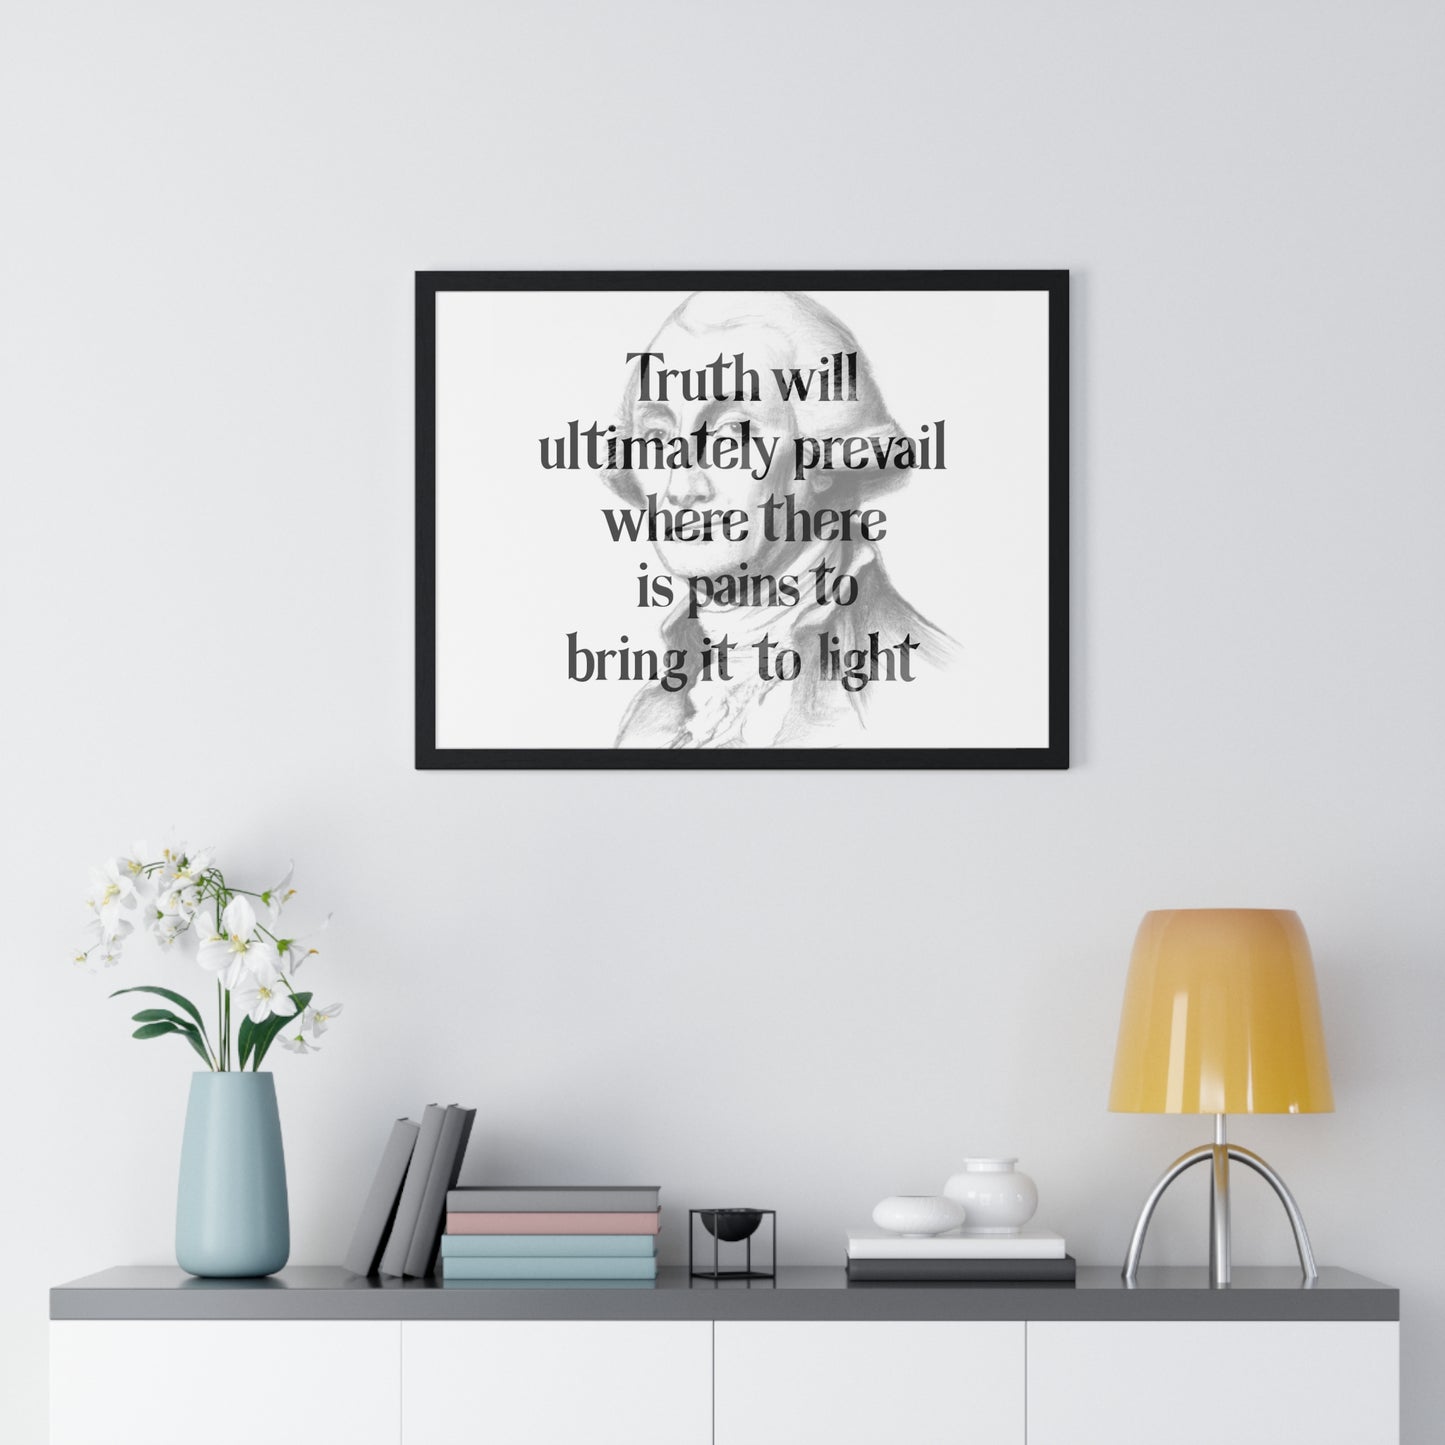 George Washington Quote 2, Poster Print, Horizontal, Light, 1st President of the United States, American Patriots, AI Art, Political Art, Presidential Portraits, Presidential Quotes, Inspirational Quotes